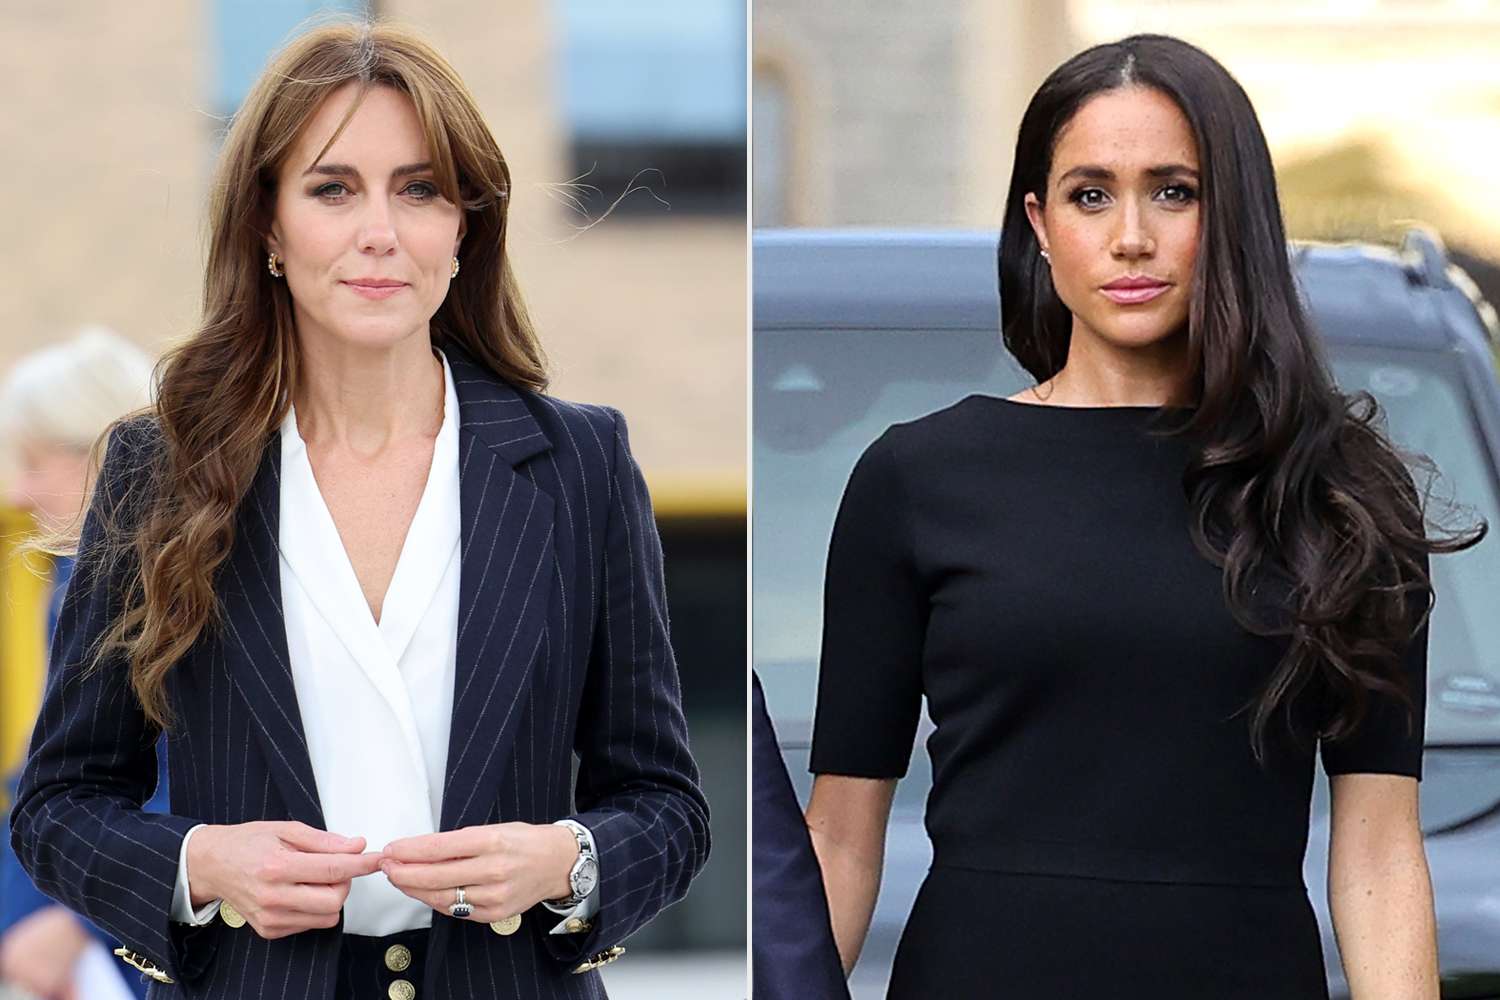 Royal war : Meghan Markle loss royal titles over reckless comment towards Kate Middleton , get slammed - Prince Harry gave family 24hrs to revise it